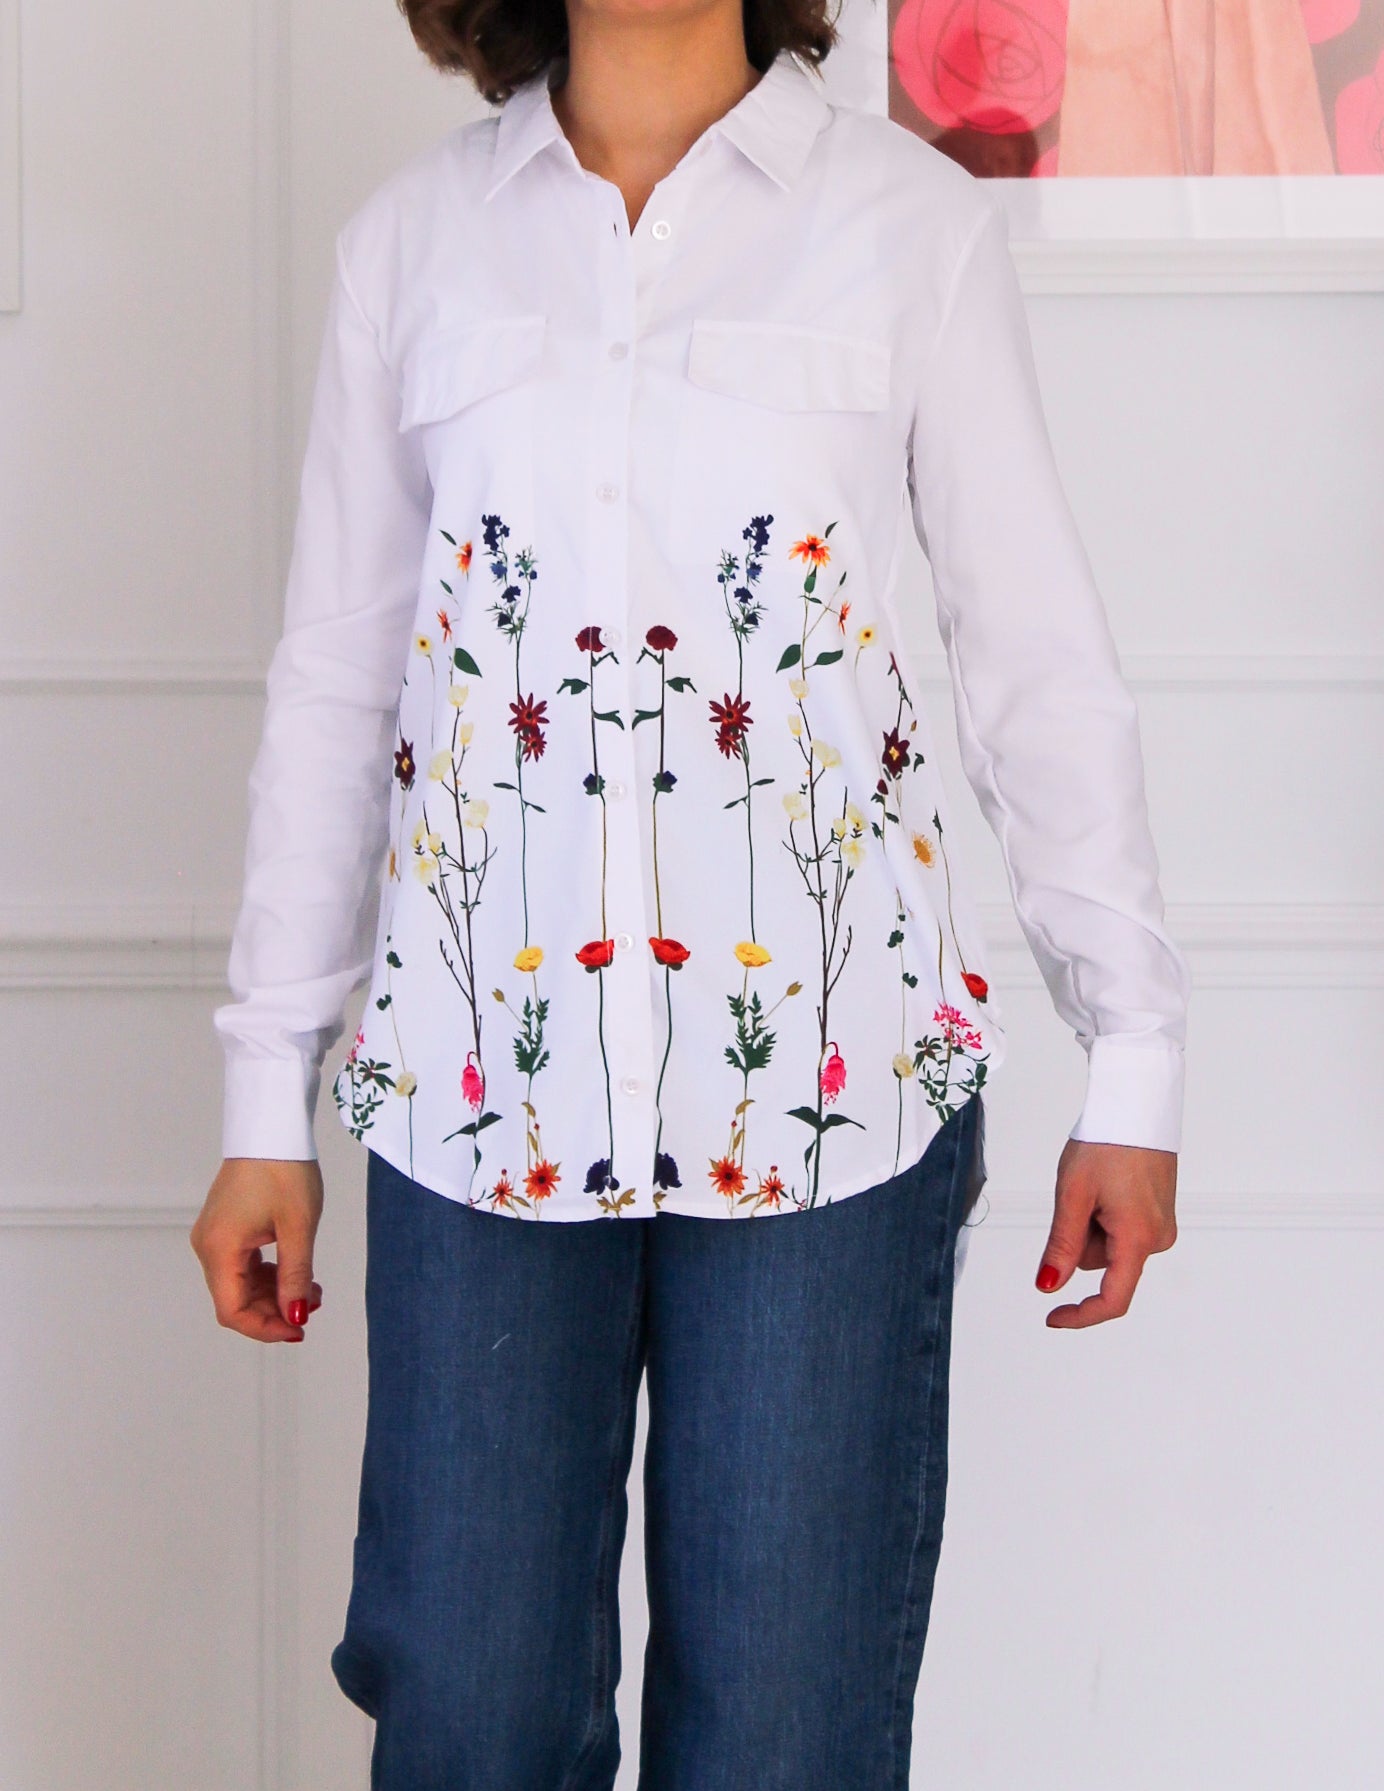 White shirt decorated with floral patterns